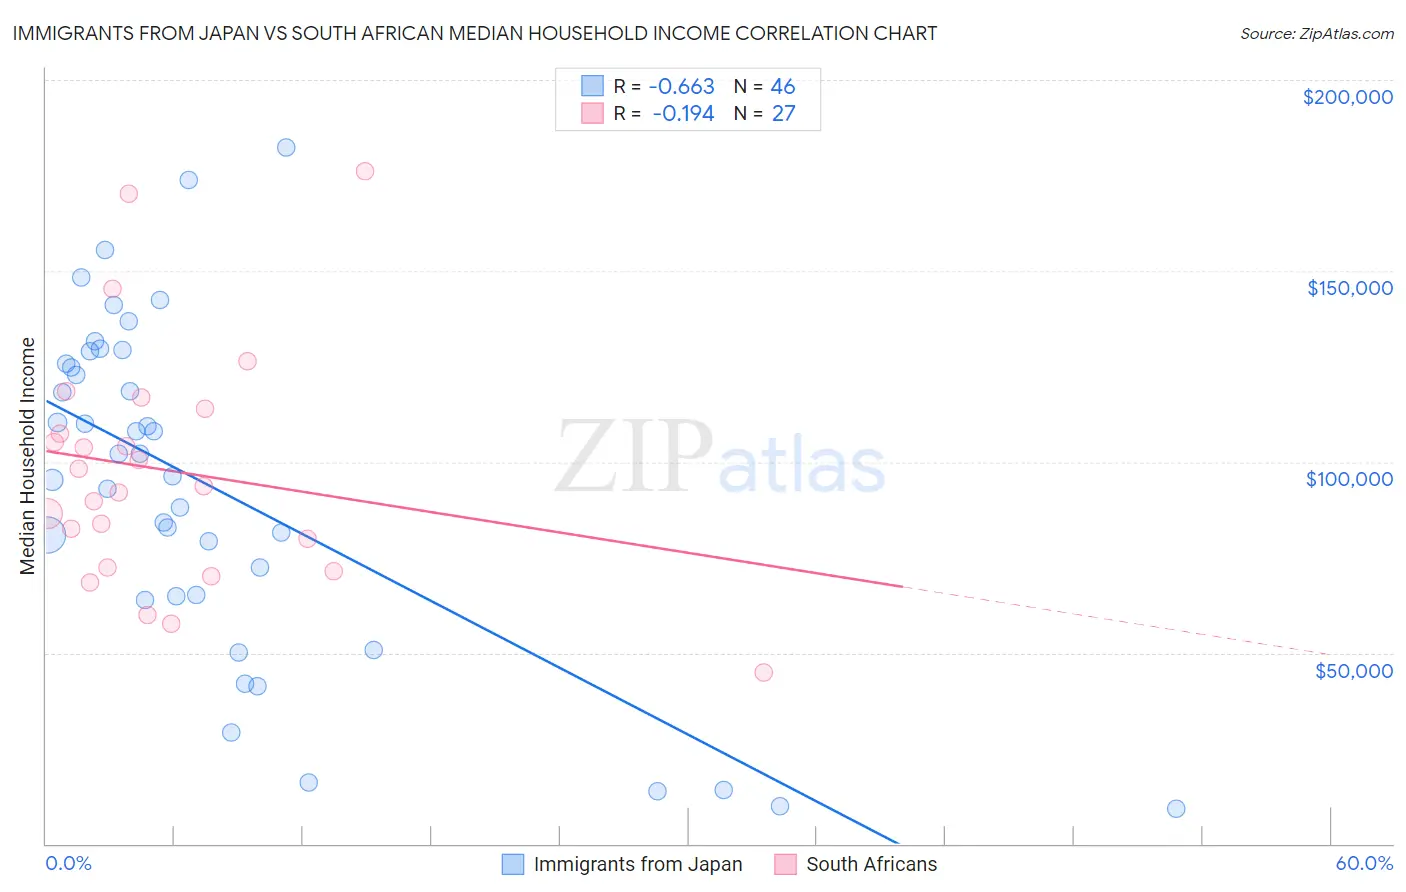 Immigrants from Japan vs South African Median Household Income